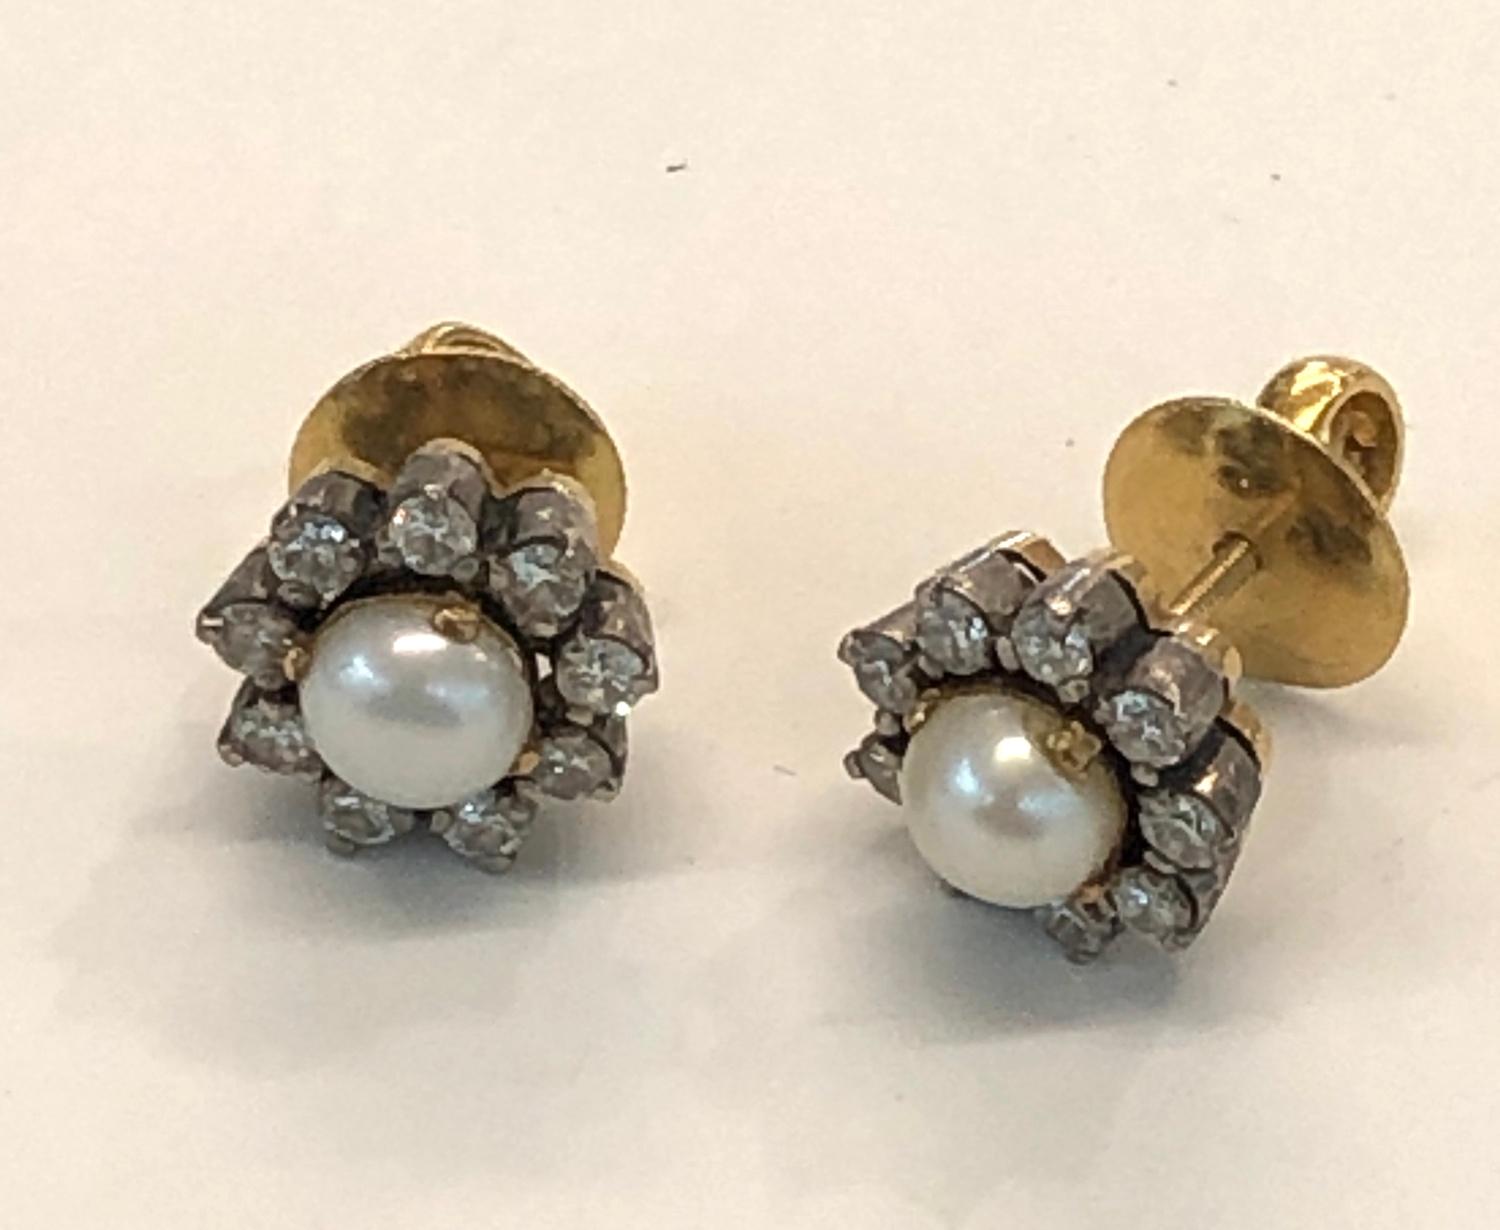 Pair of diamond and pearl earrings 18ct gold set with central pearl with diamonds around pearl - Image 3 of 5